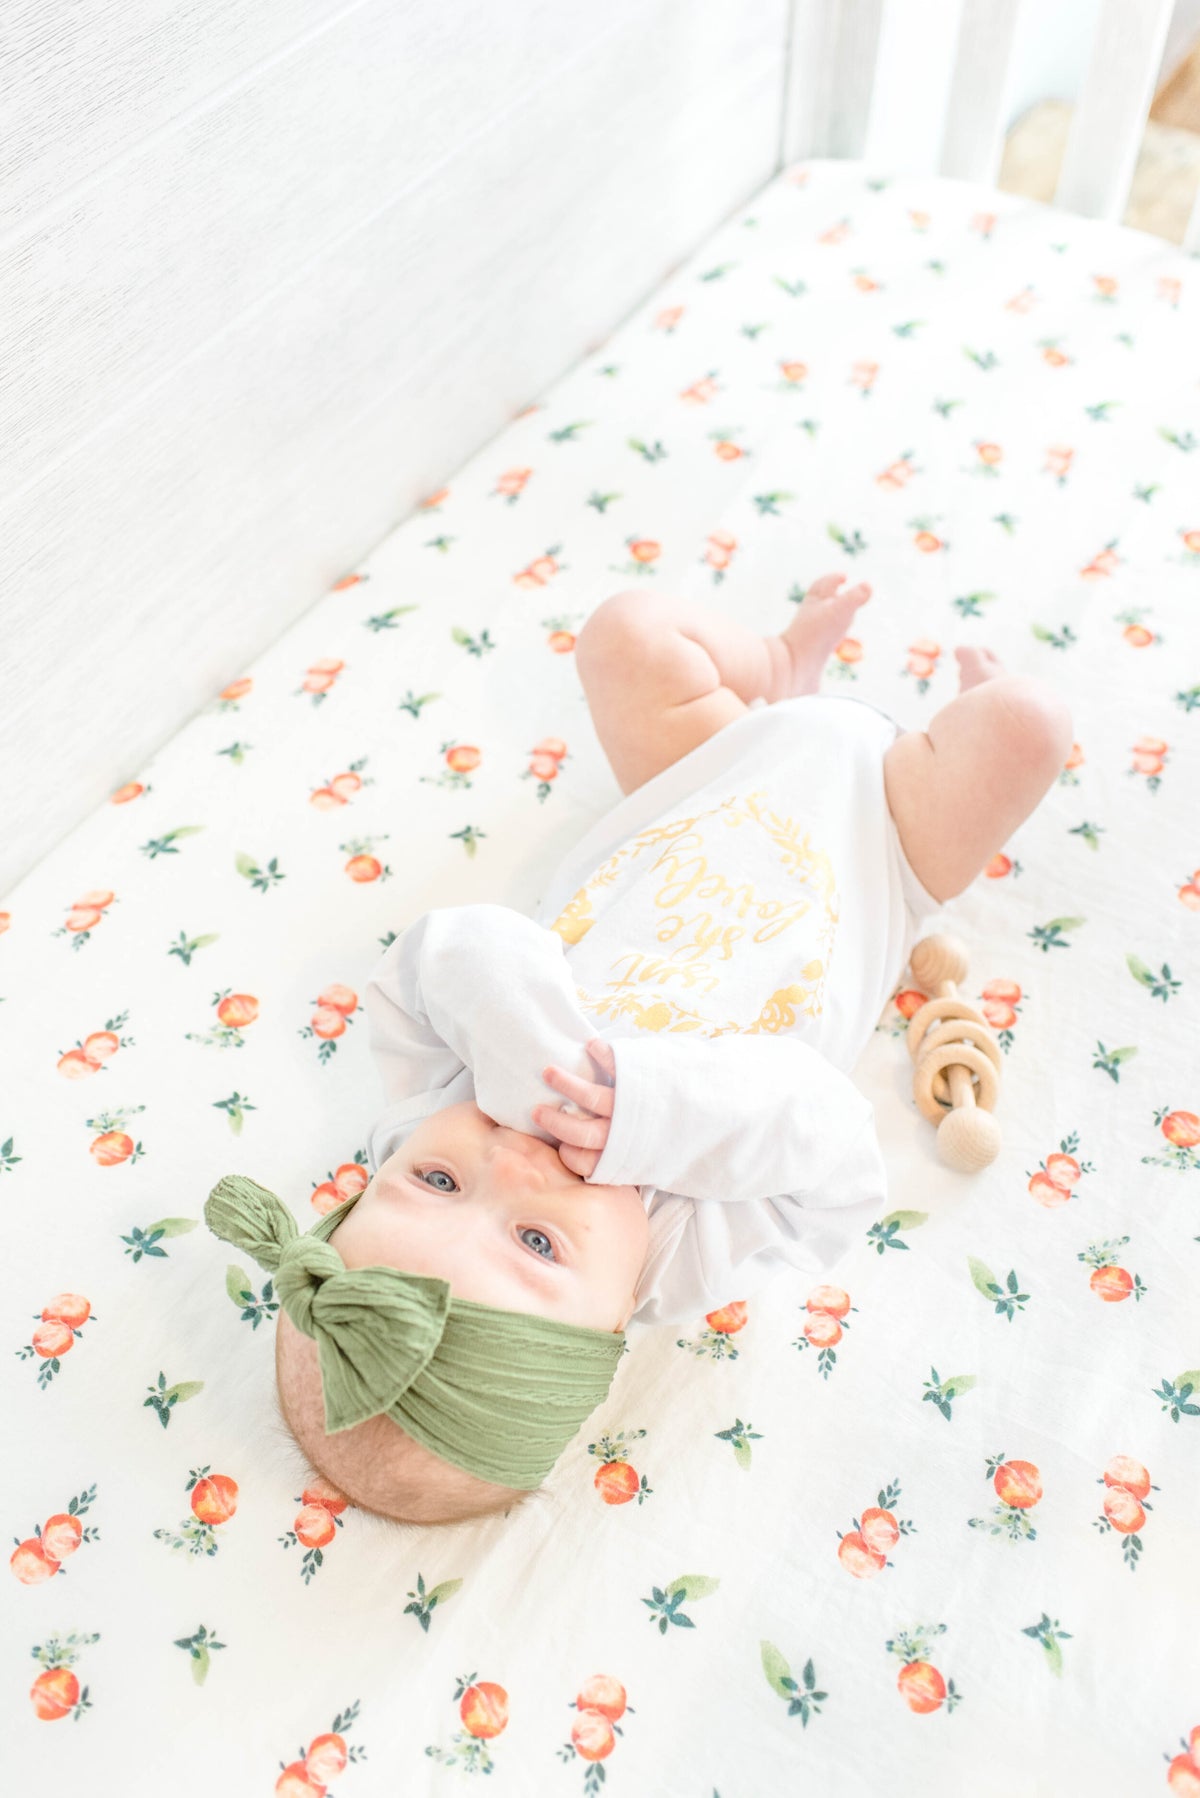 Infant laying a white linen crib sheet with peach details